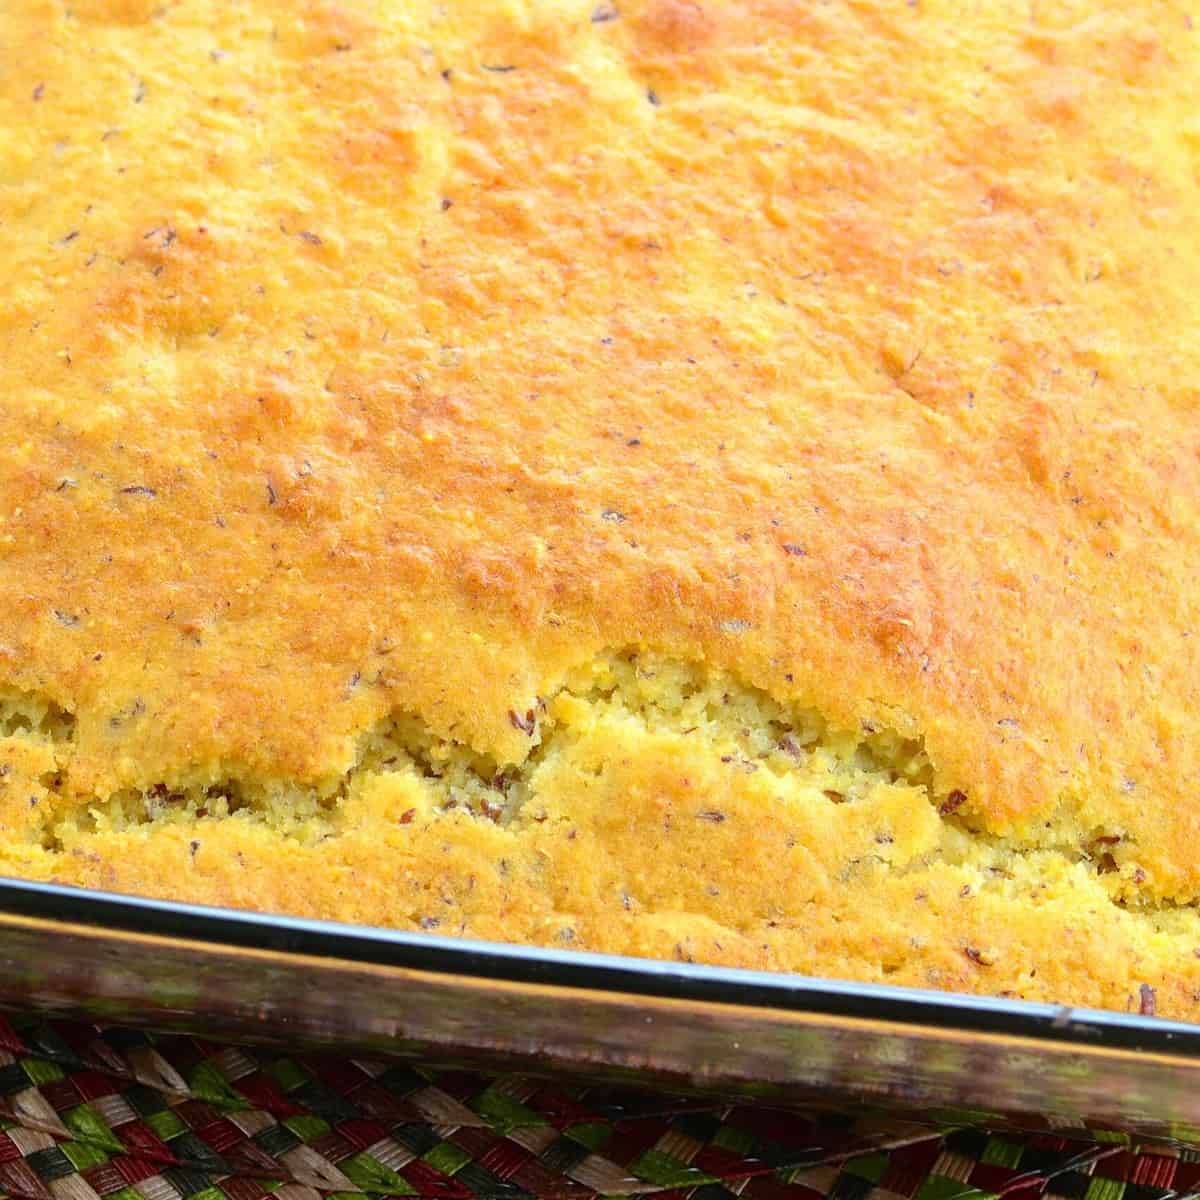  Golden and crumbly vegan cornbread fresh out of the oven!